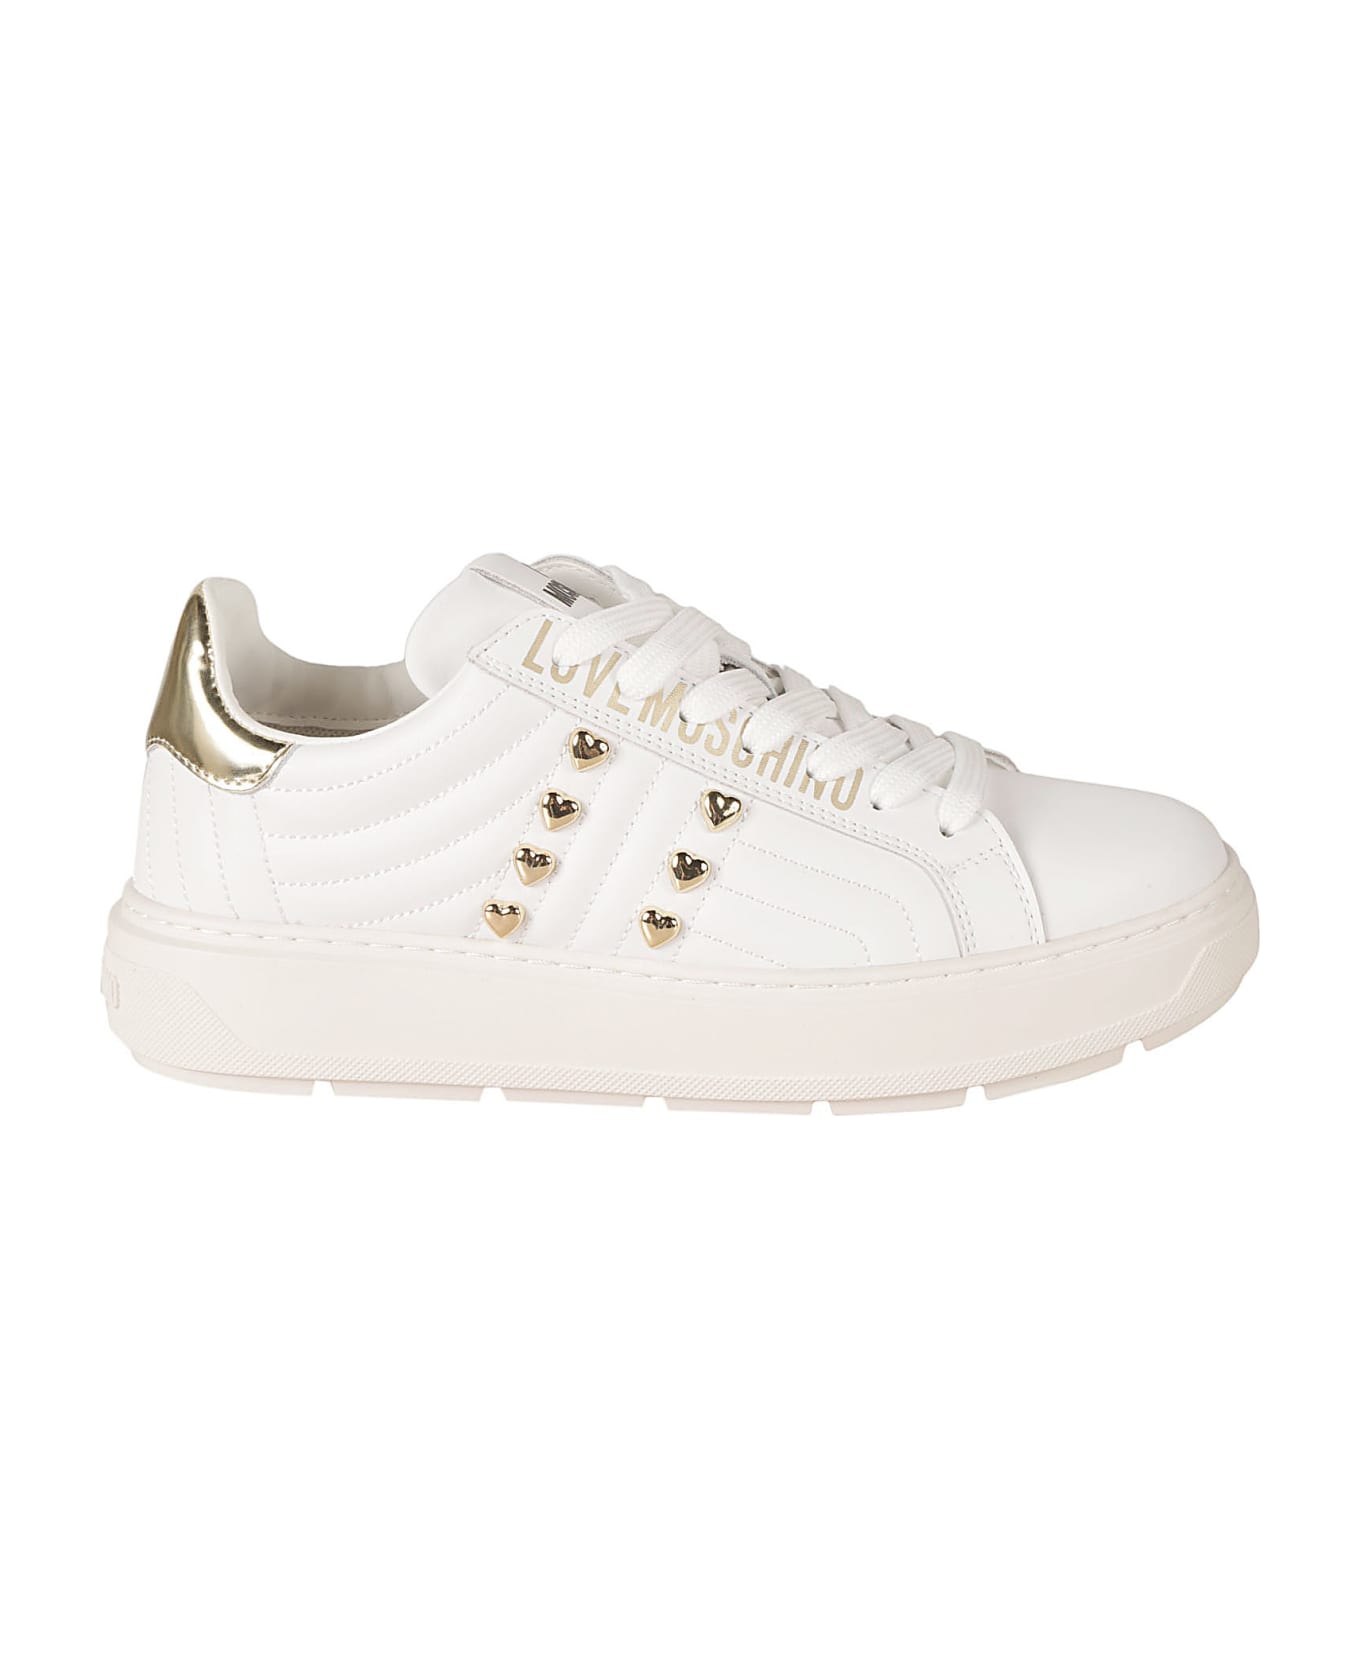 Love Moschino Bold40 Sneakers - White スニーカー